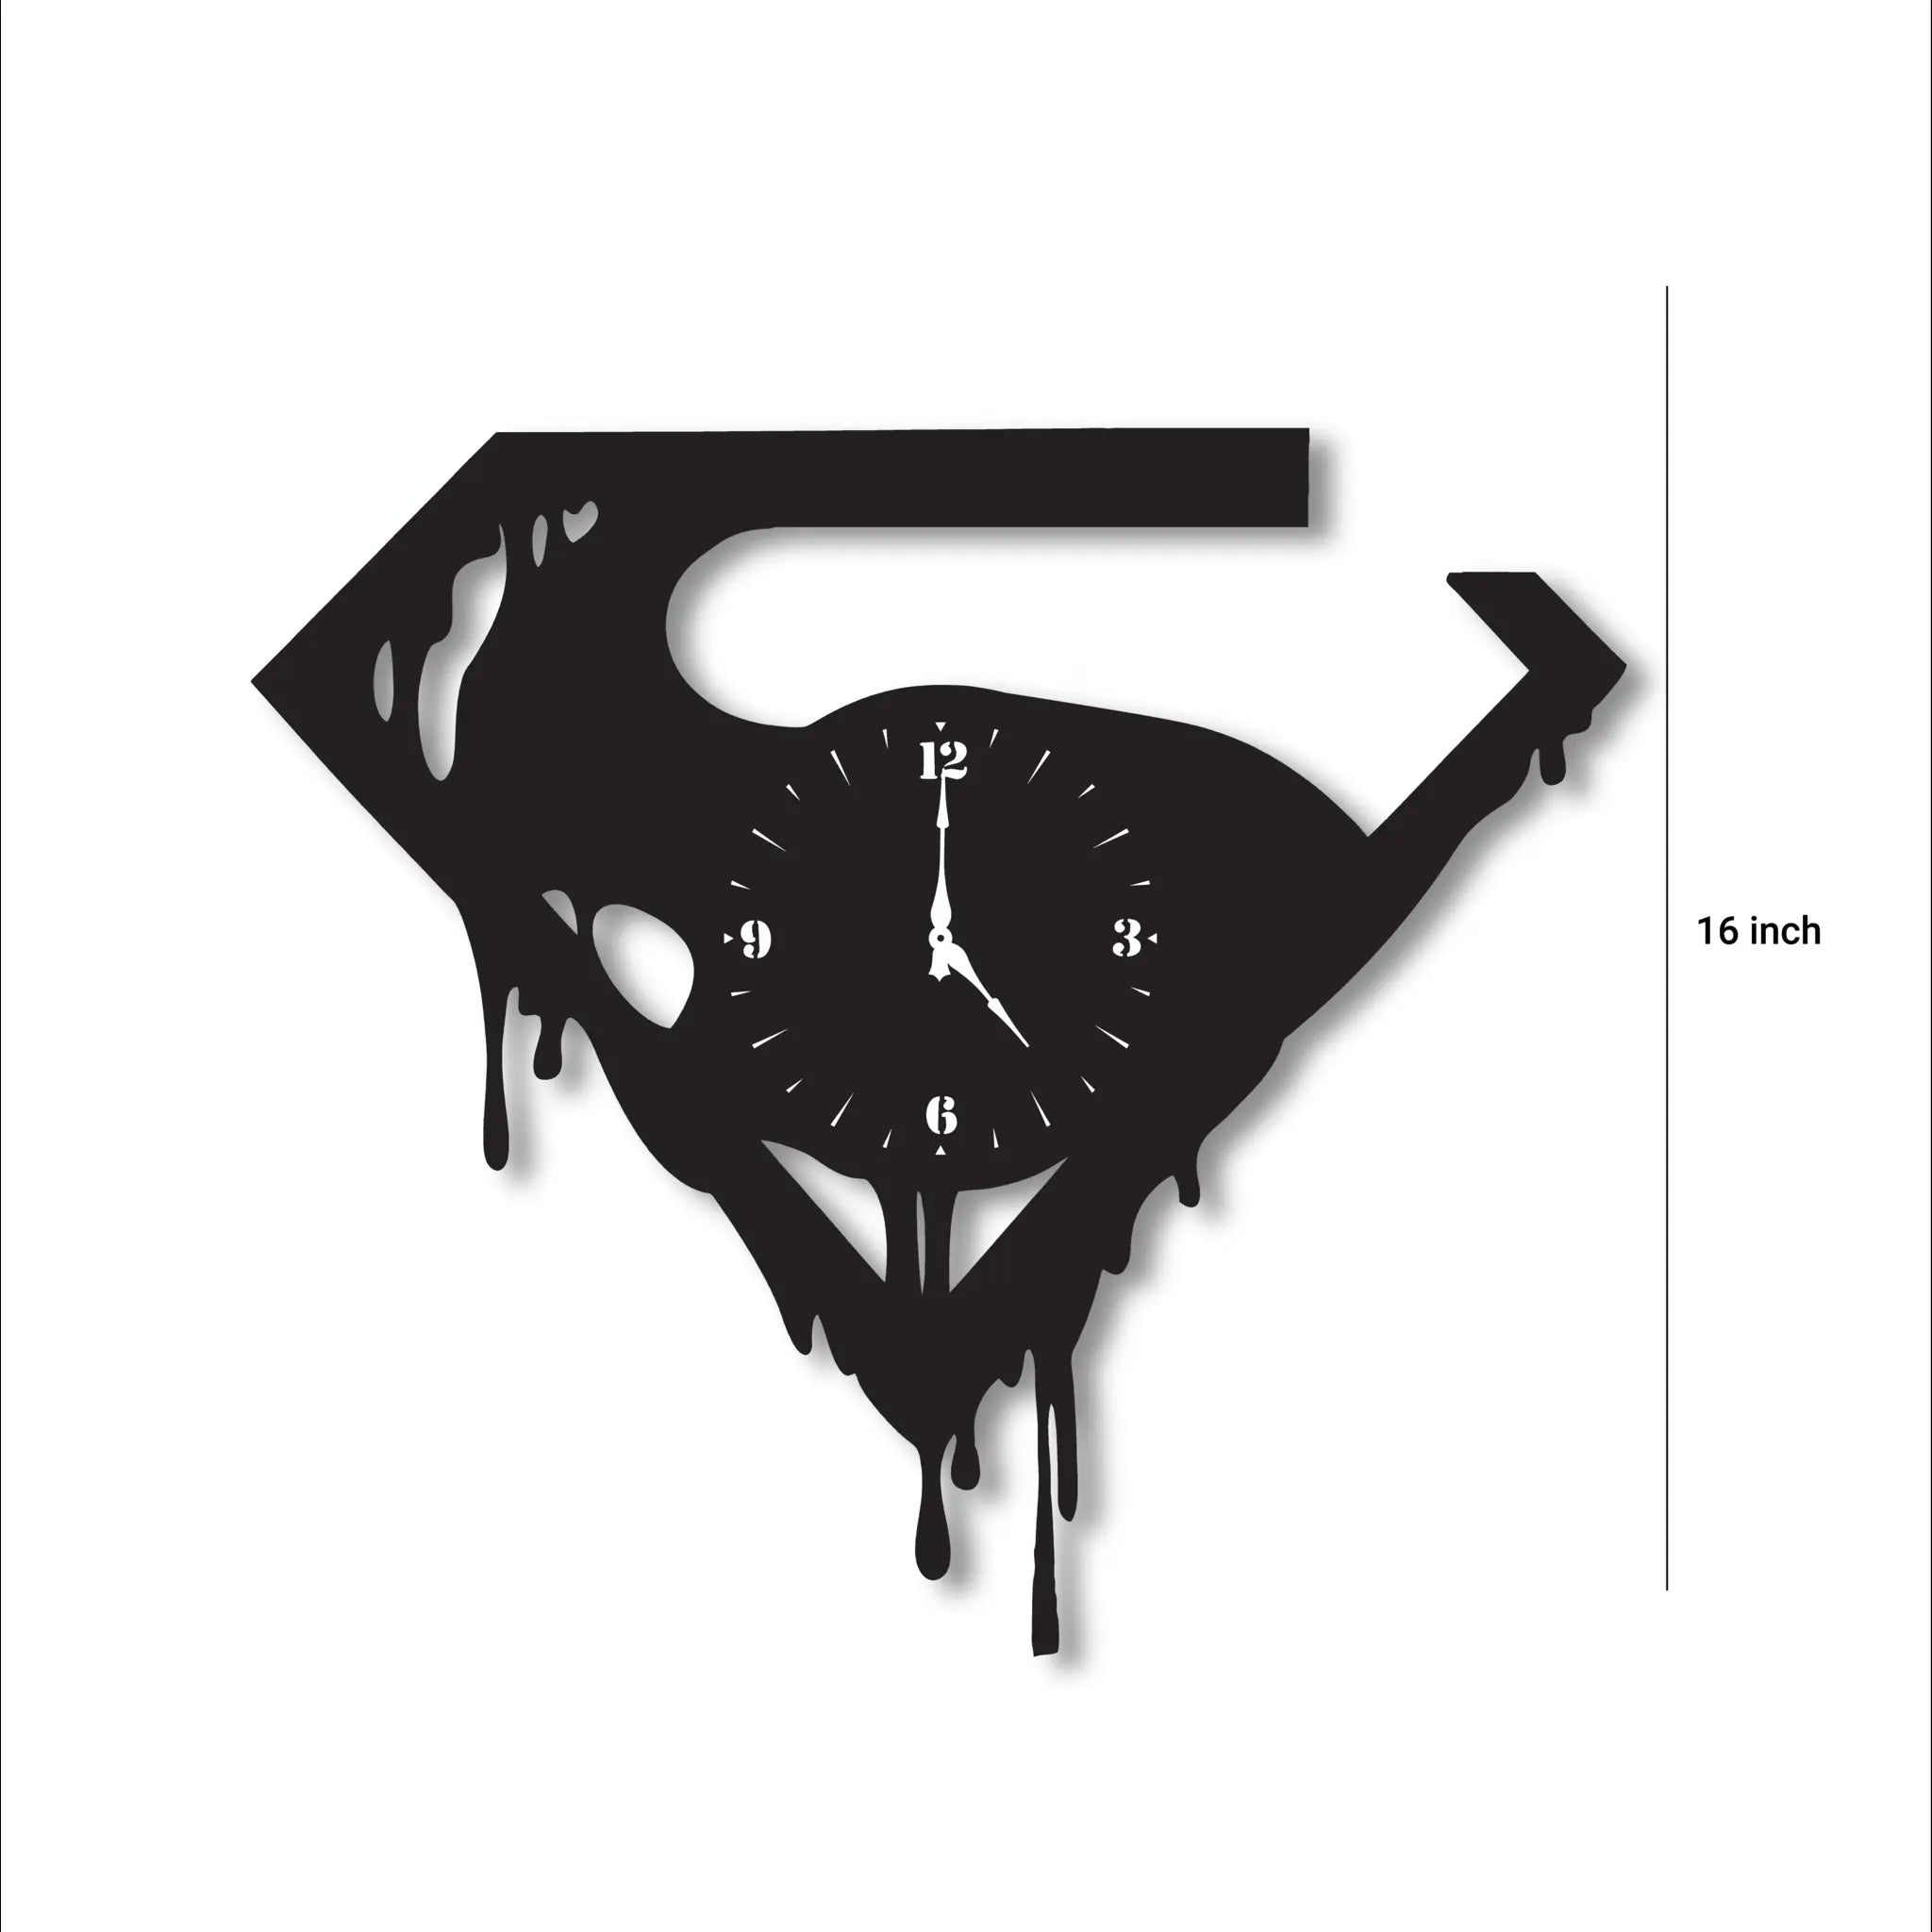 Man of Metal Record Wall Clock: An Exceptional Present for Comic Book Aficionados and Superhero Birthday Celebrations